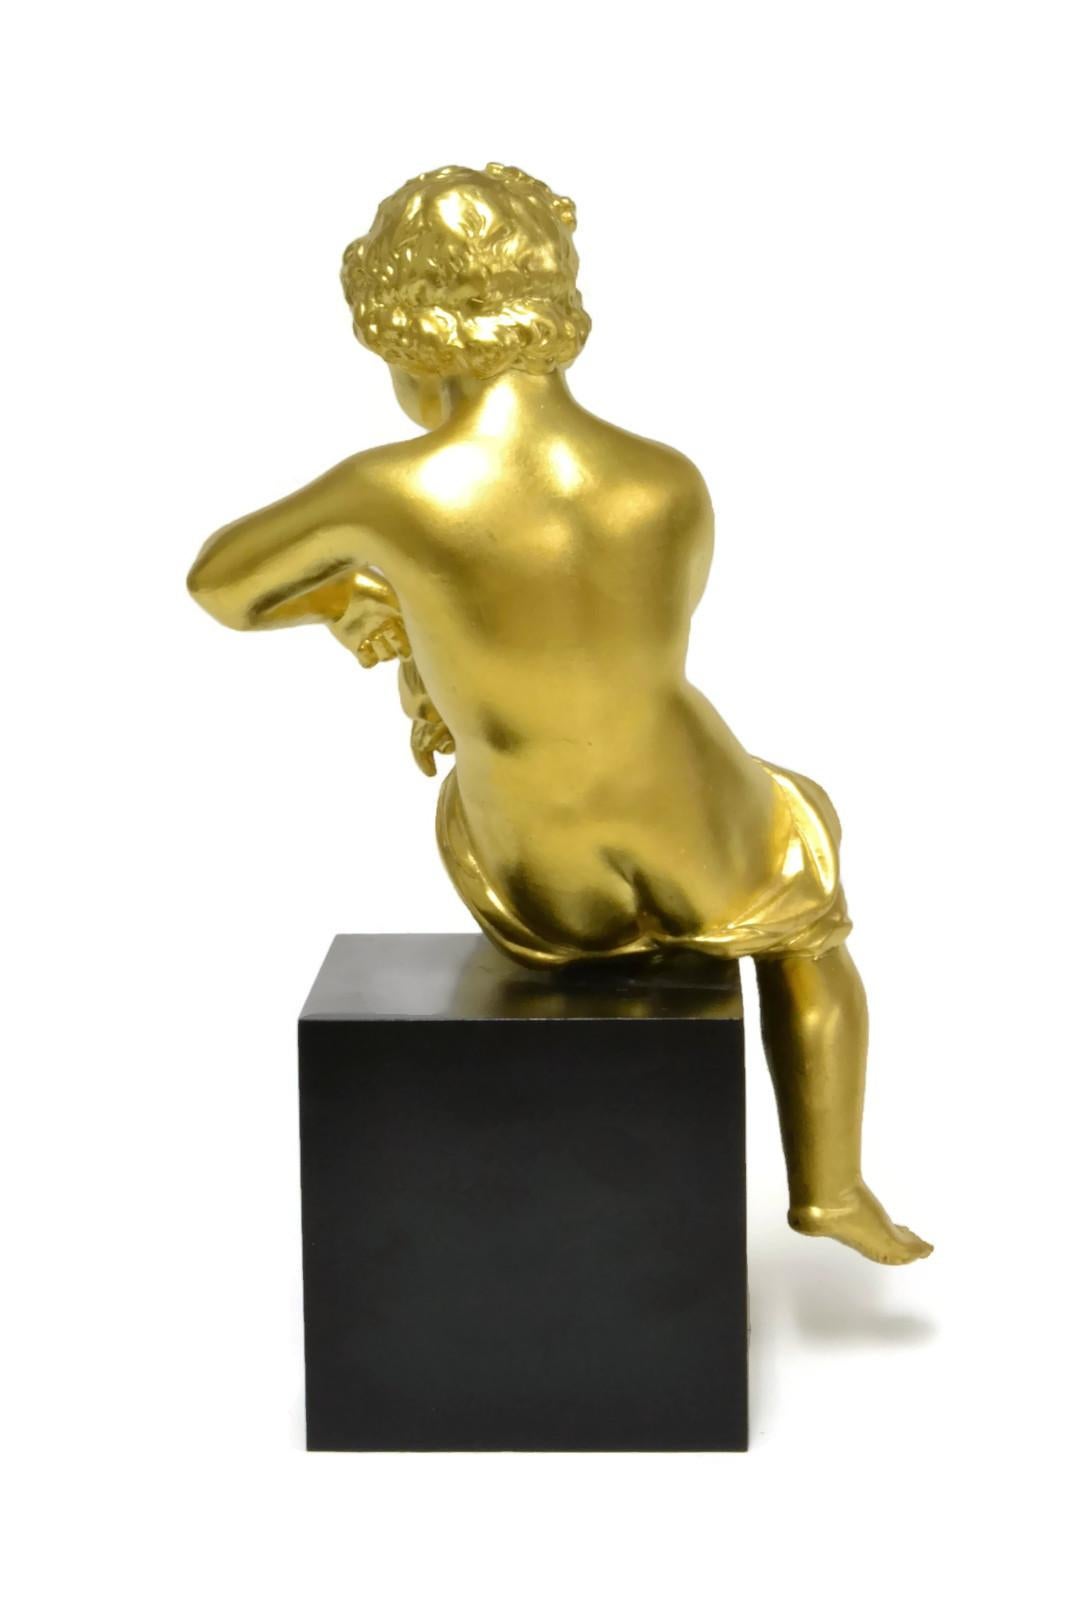 A 19th century bronze Putto 13 inches head to toe mounted on a (later) black metal base 4.5